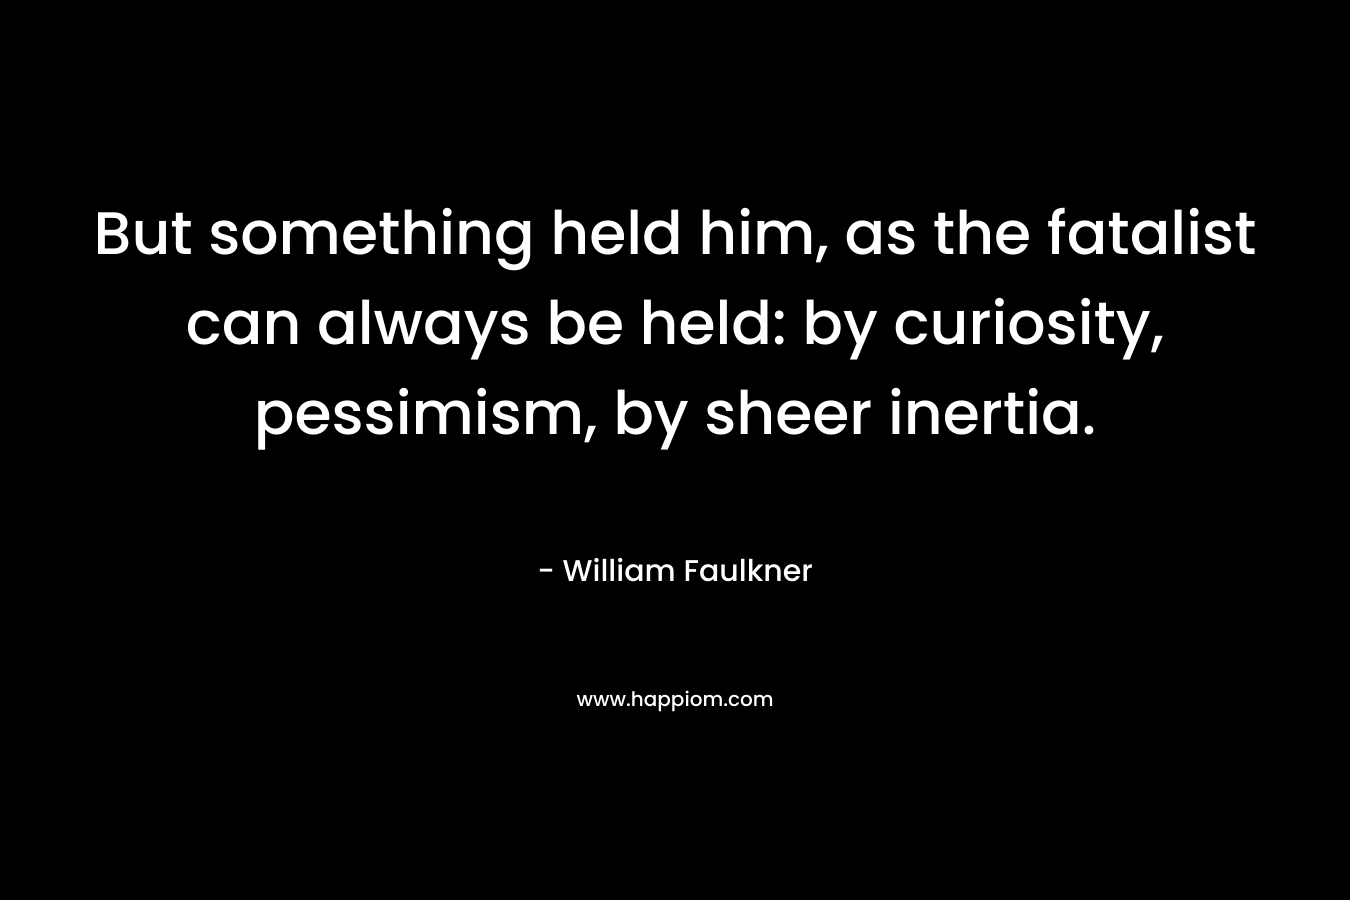 But something held him, as the fatalist can always be held: by curiosity, pessimism, by sheer inertia.